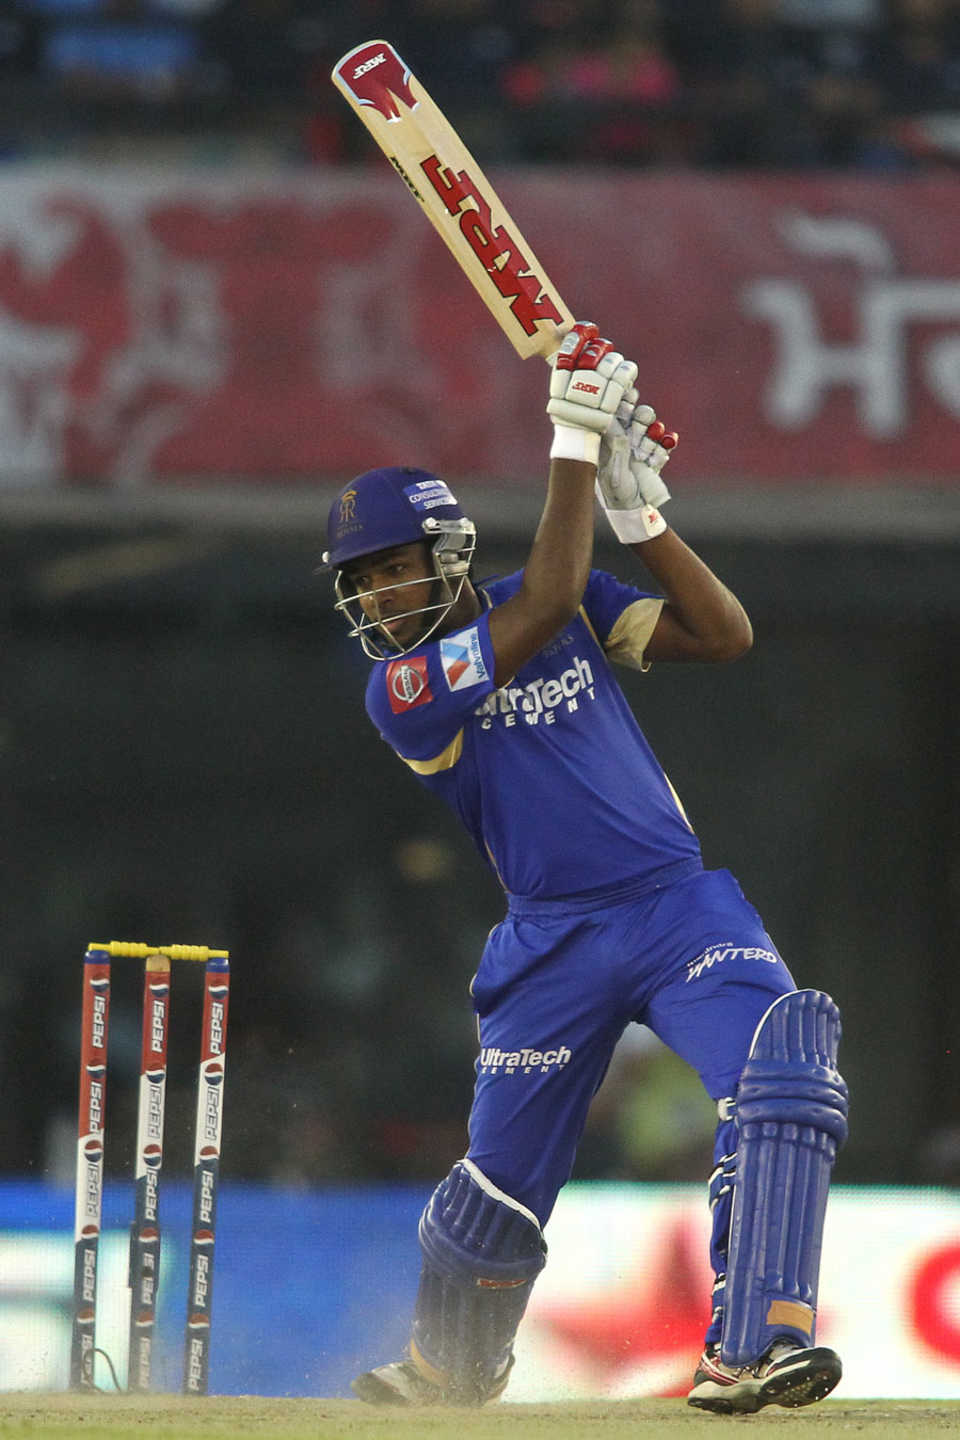 Sanju Samson digs one out to the off side